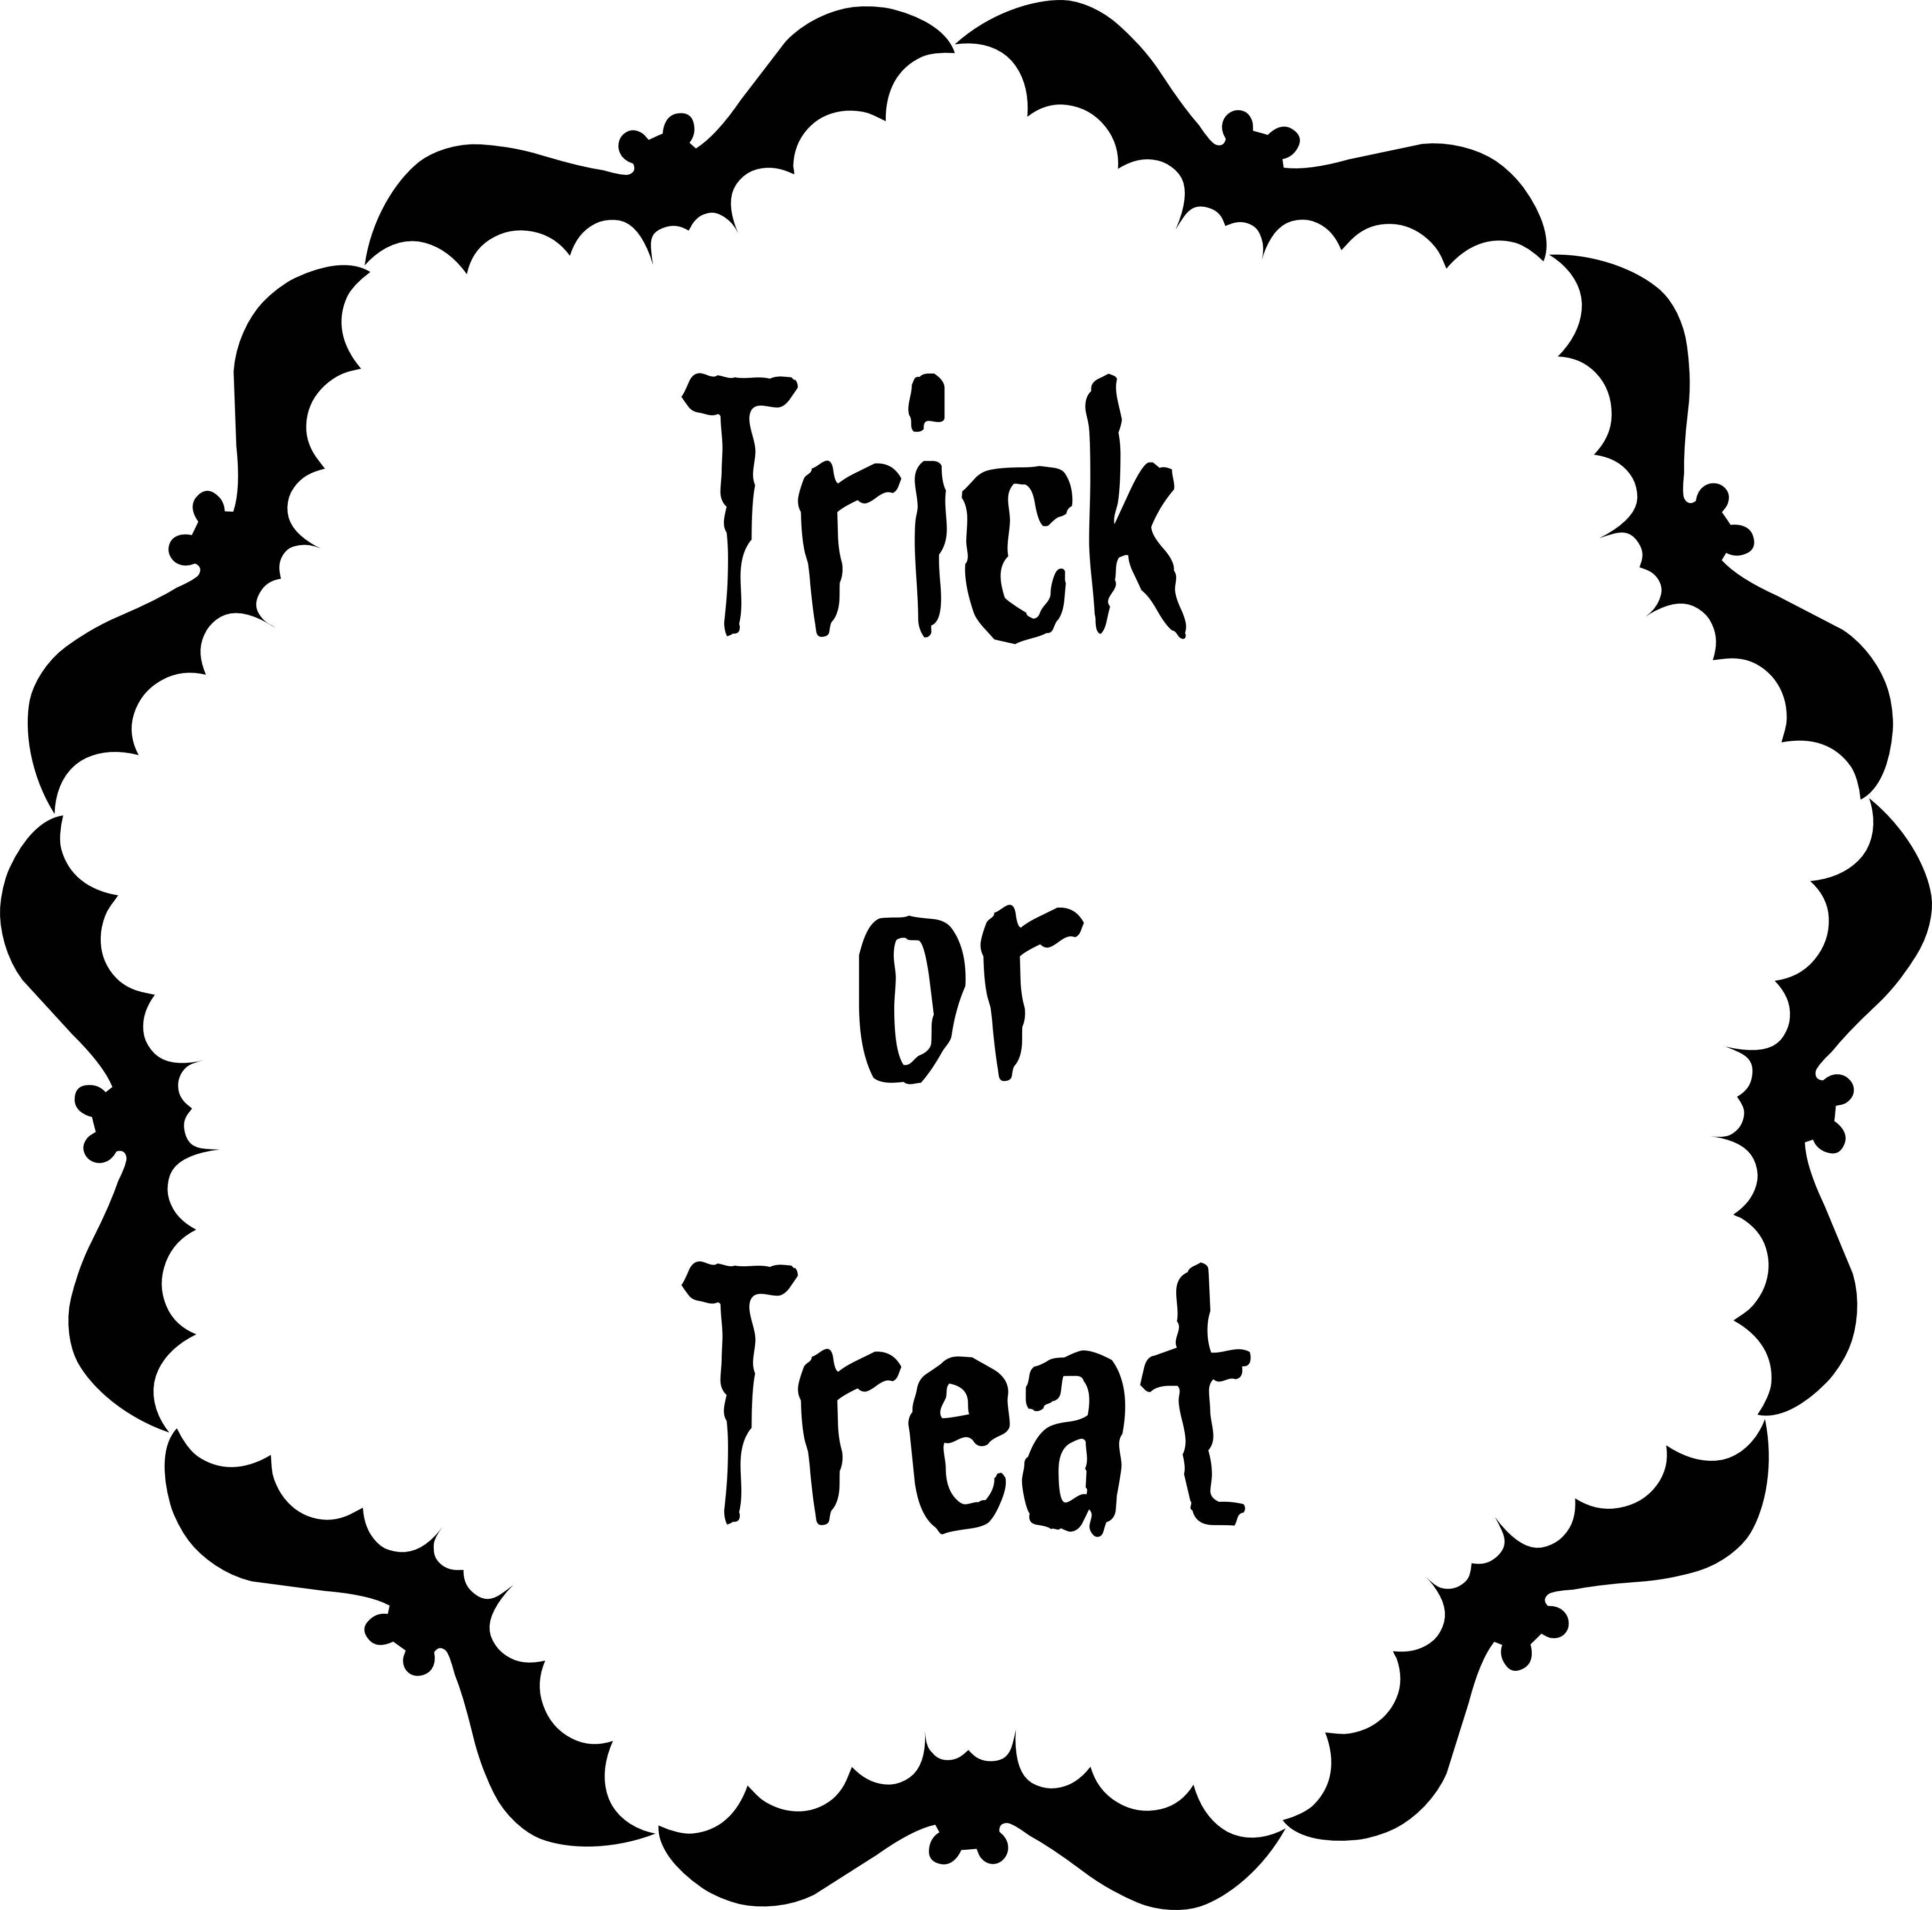 Trunk or treat trick or treat clipart 9